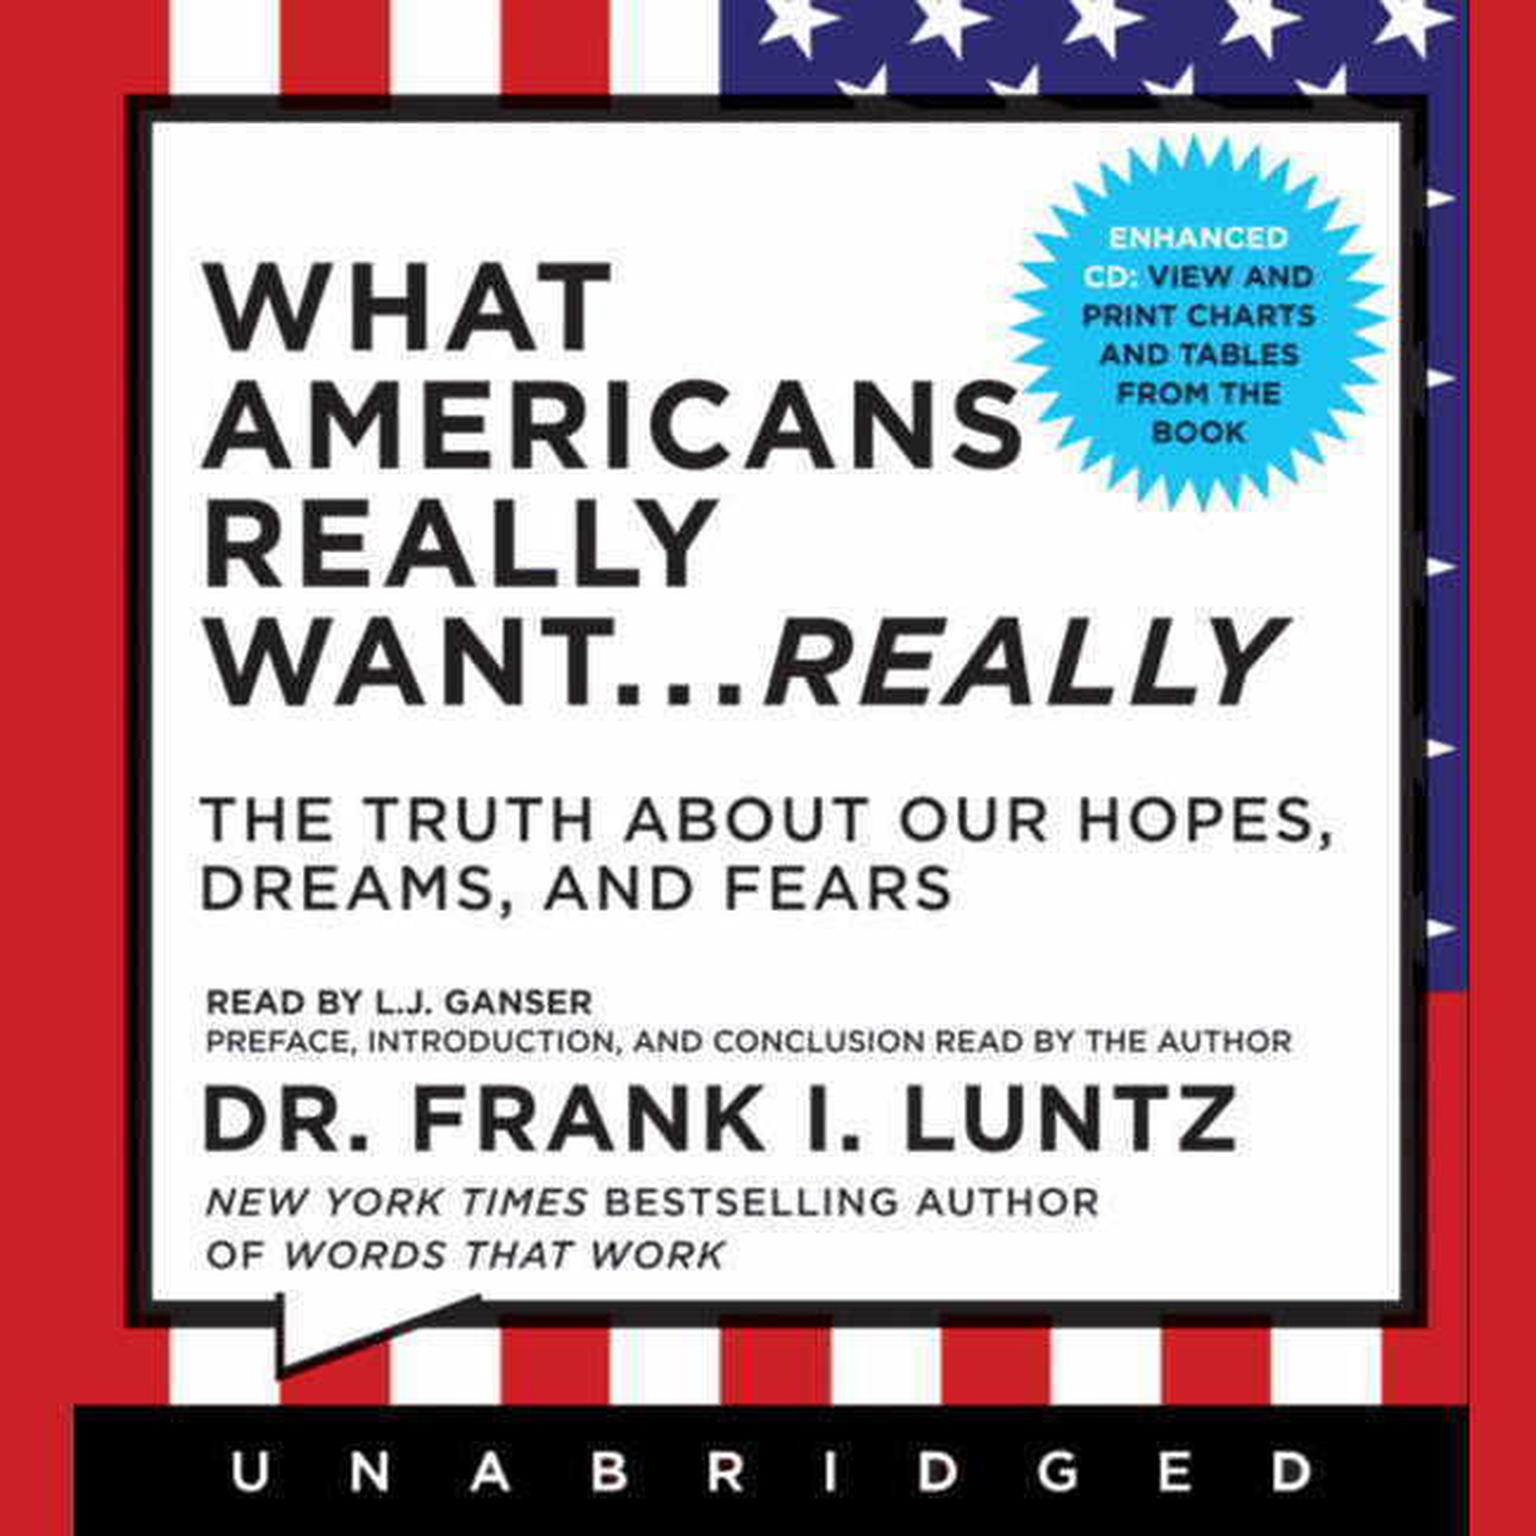 What Americans Really Want...Really: The Truth About Our Hopes, Dreams, and Fears Audiobook, by Frank I. Luntz